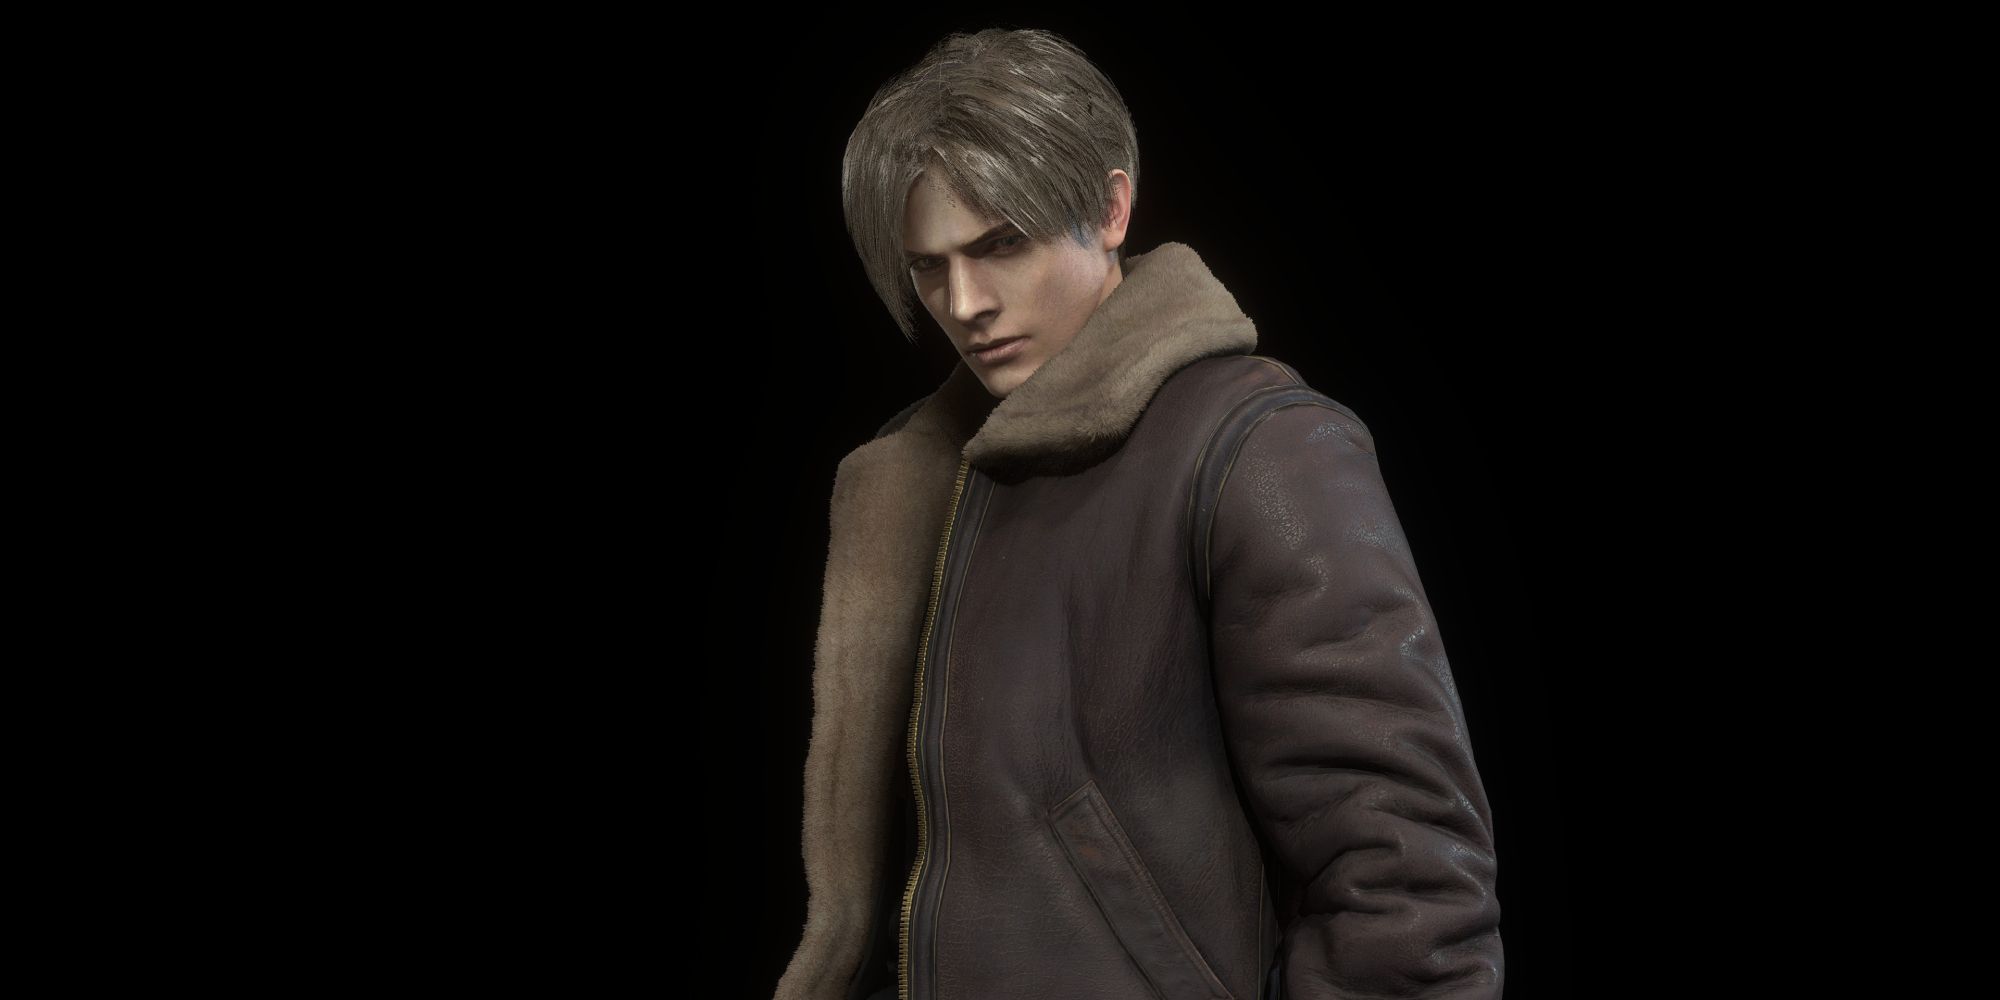 Leon in his classic RE4 2005 Jacket